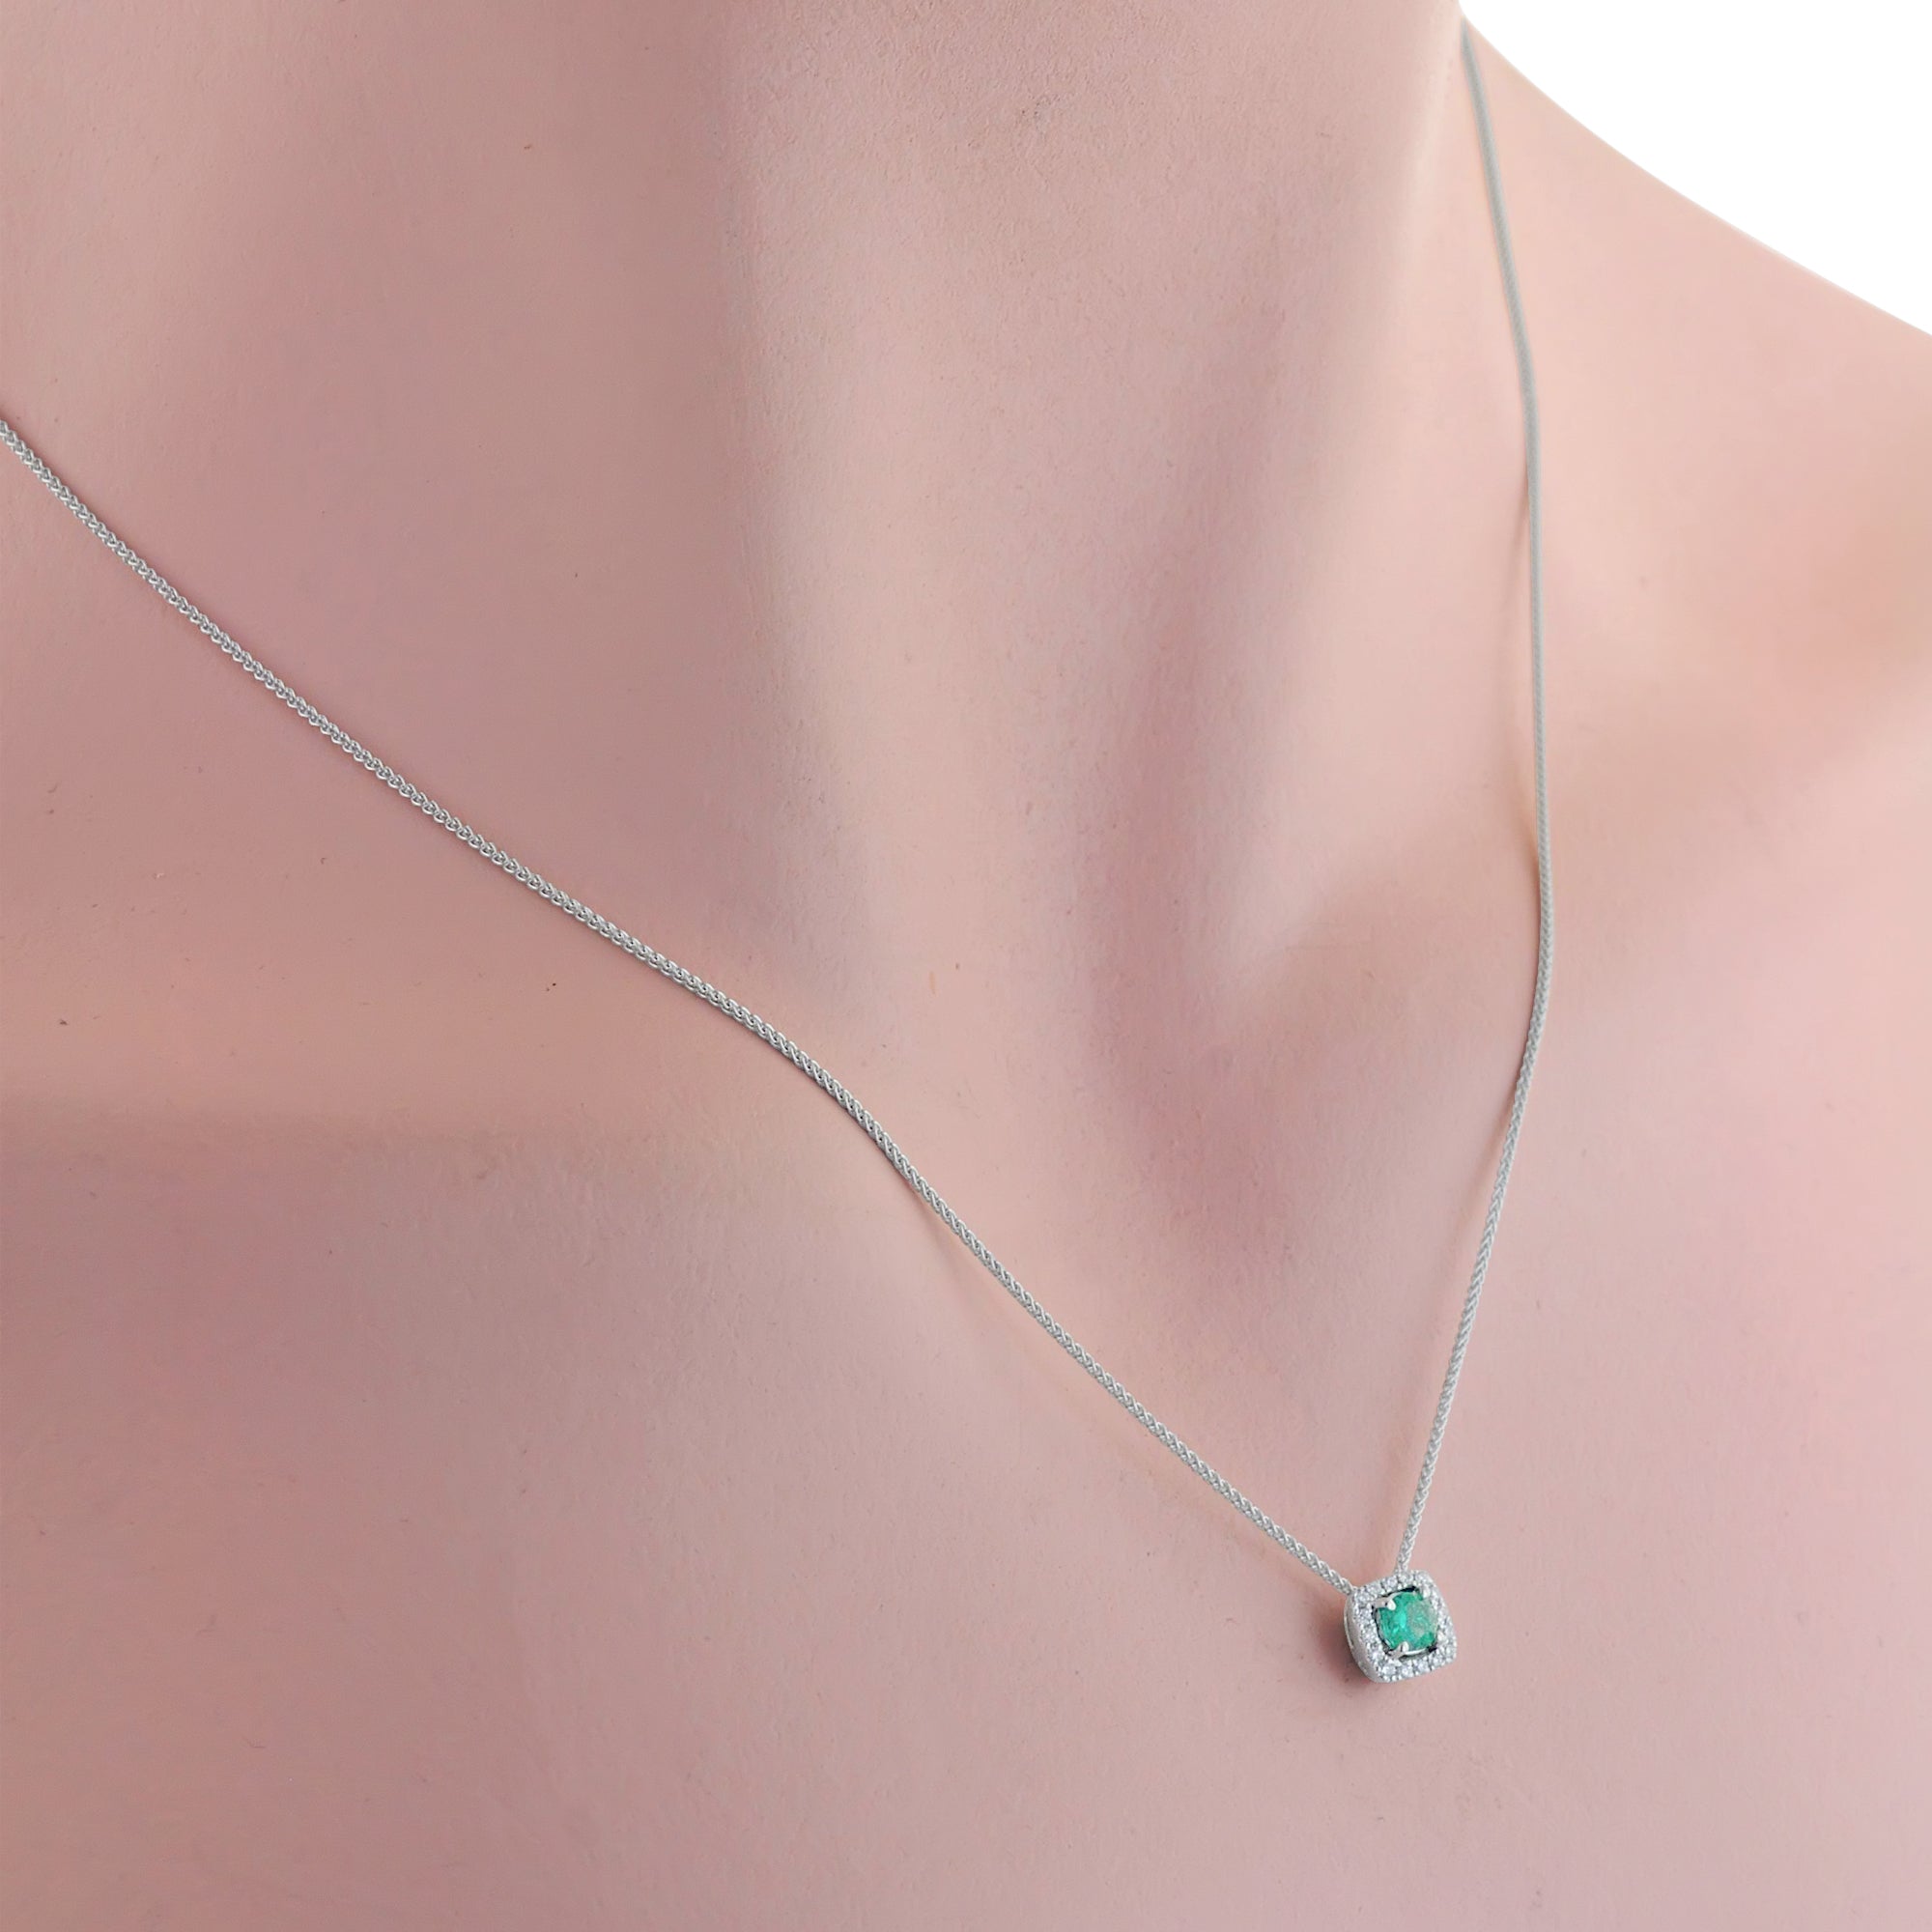 Emerald Halo Necklace in 14kt White Gold with Diamonds (1/20ct tw)